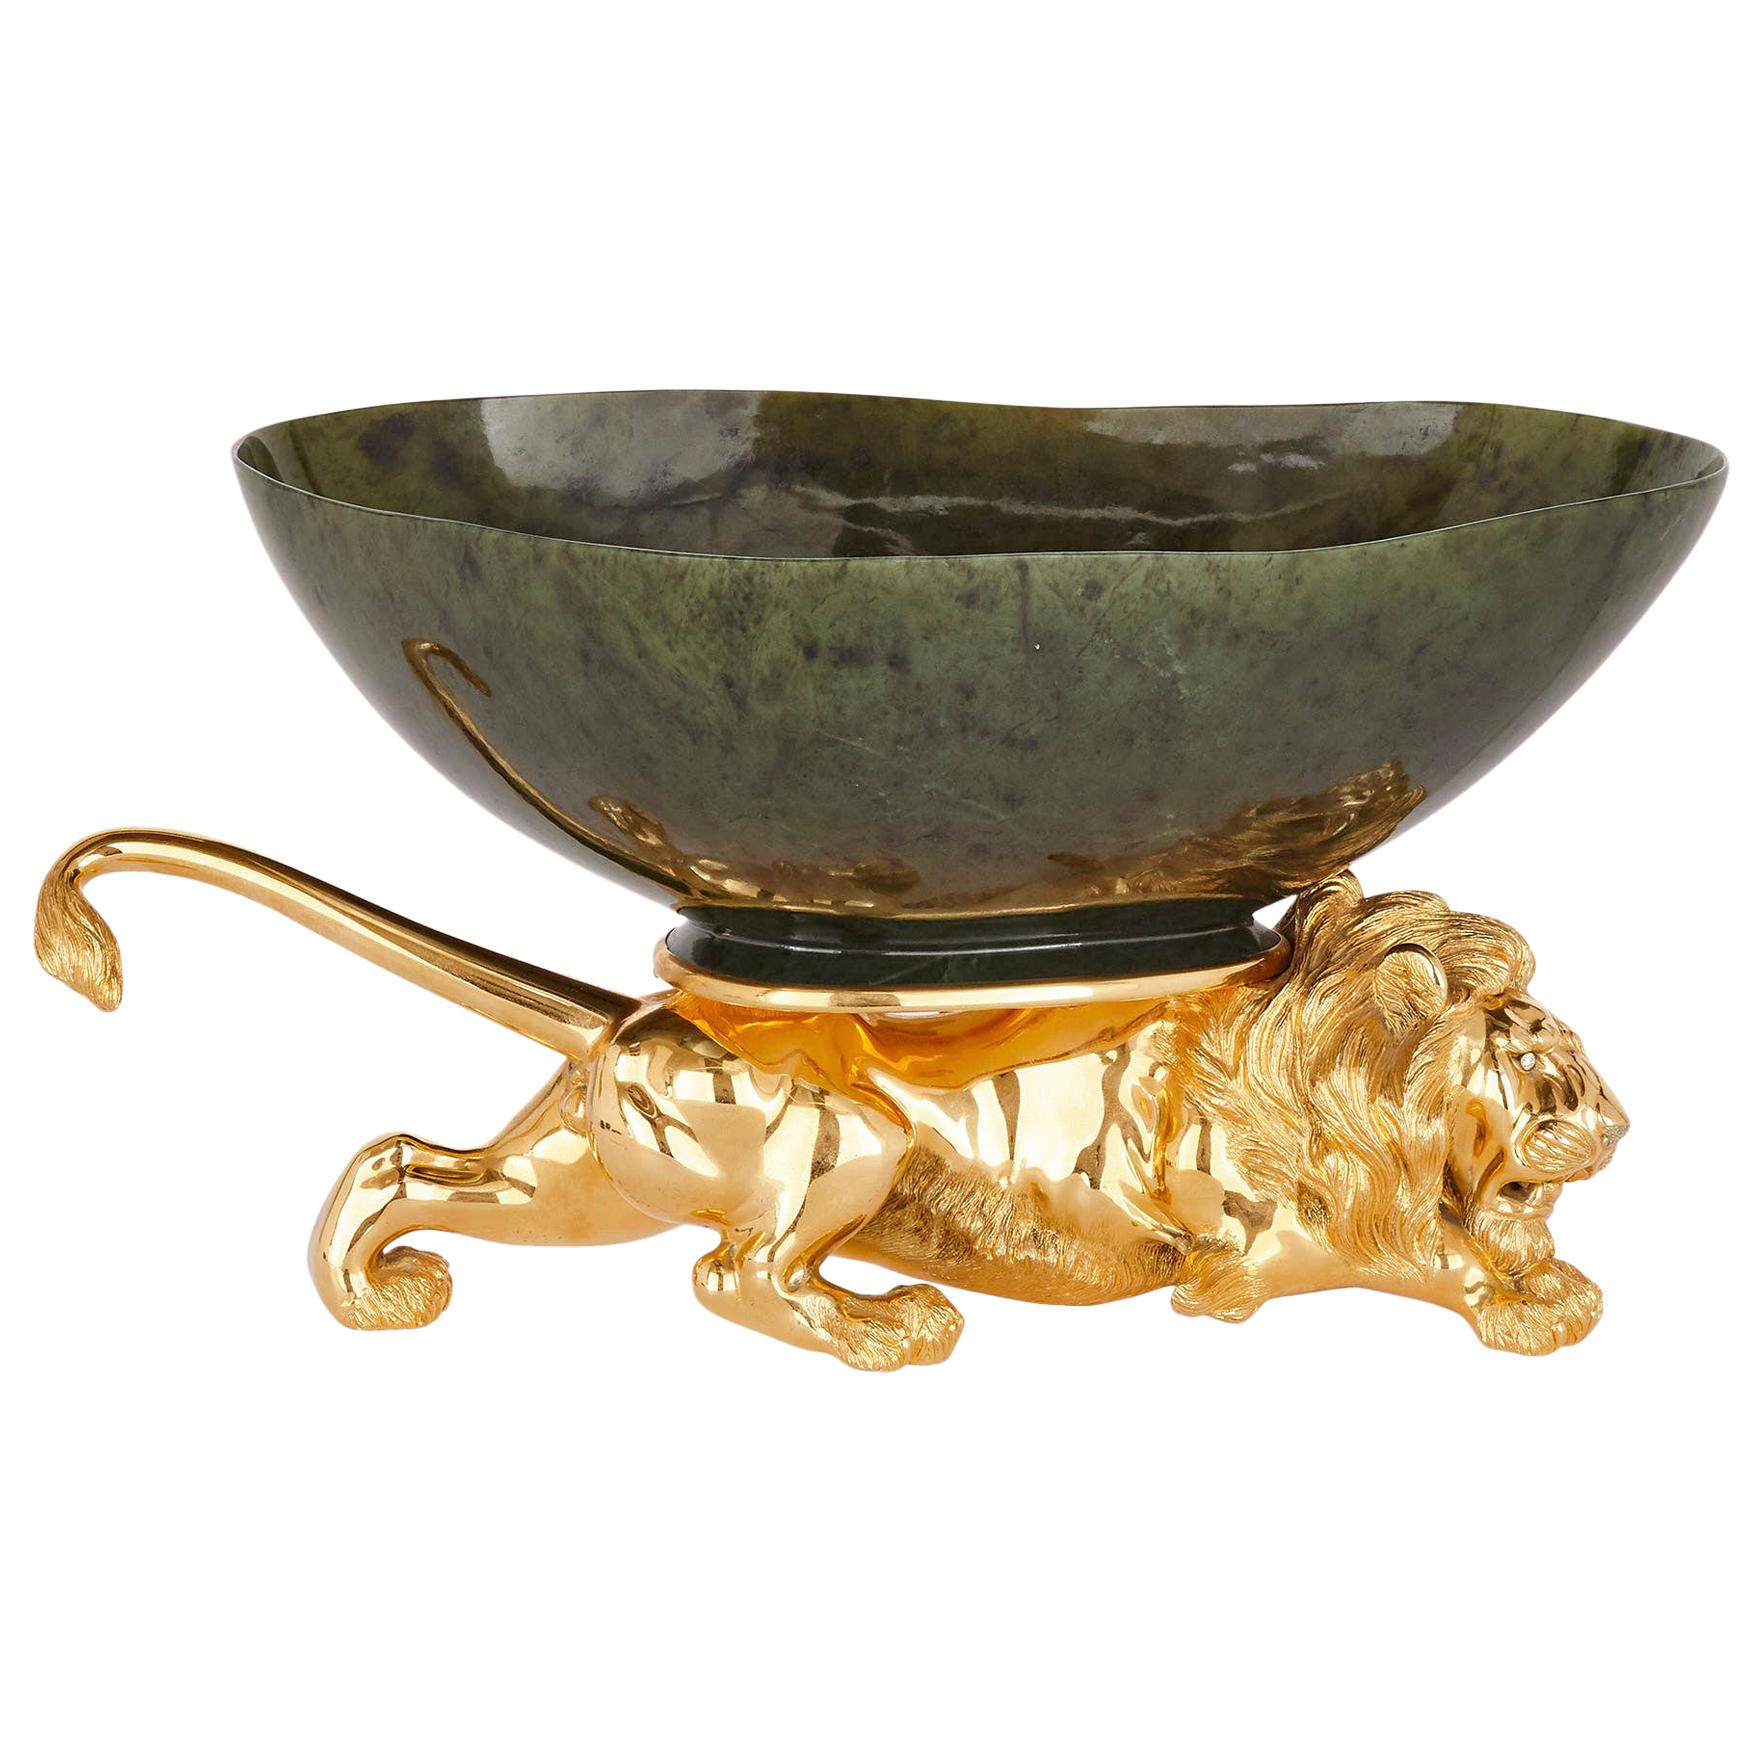 20th Century Silver-Gilt and Nephrite Crouching Lion Decorative Bowl For Sale